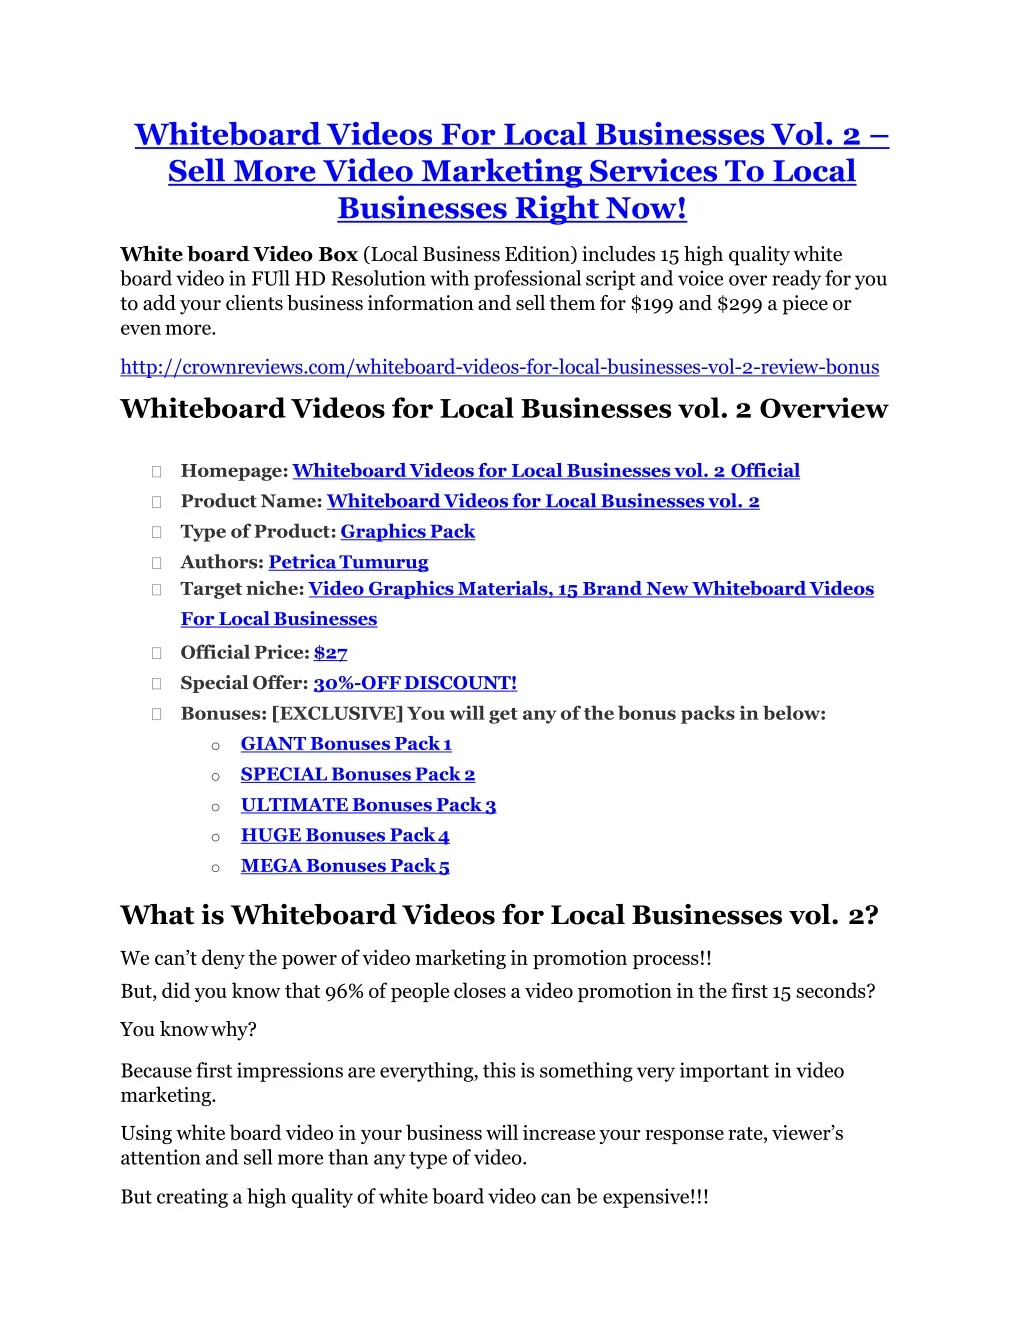 whiteboard videos for local businesses vol 2 sell